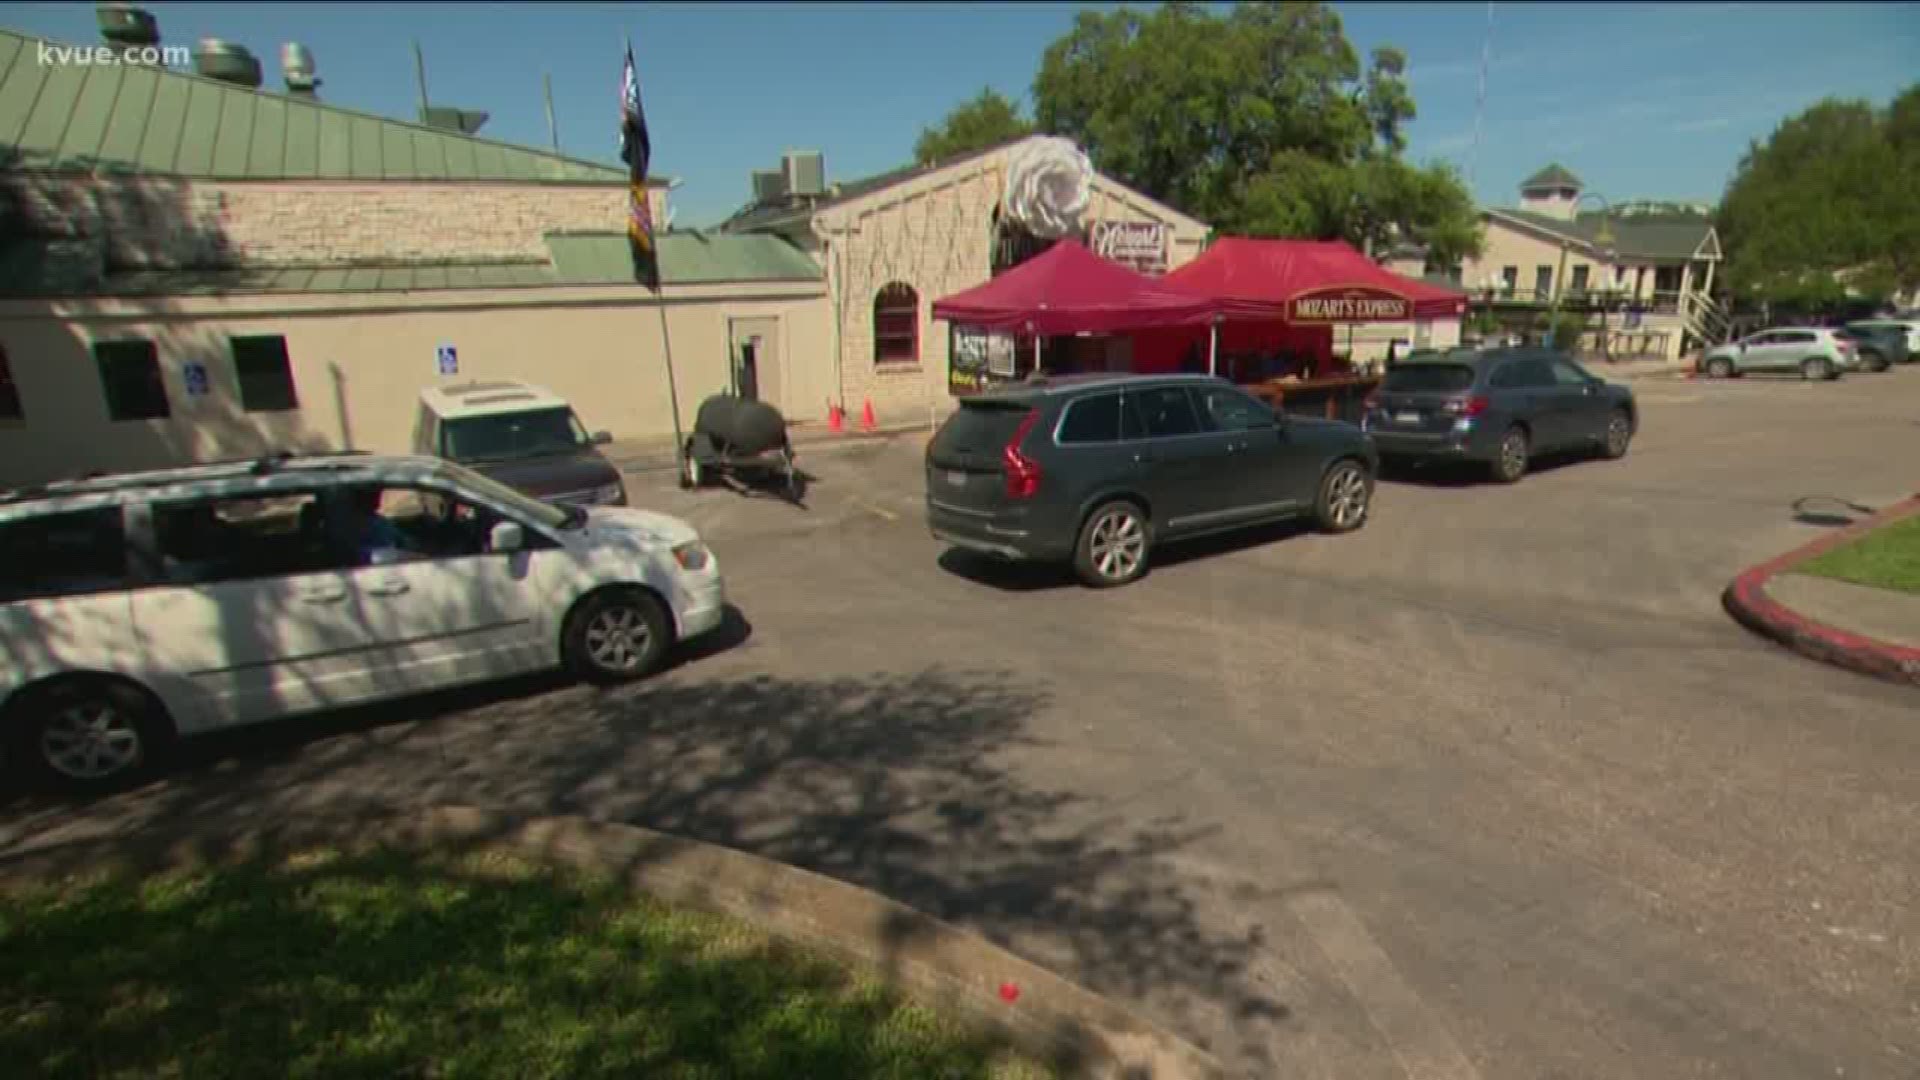 The two Austin staples have created a drive-thru to serve people during the COVID-19 pandemic.